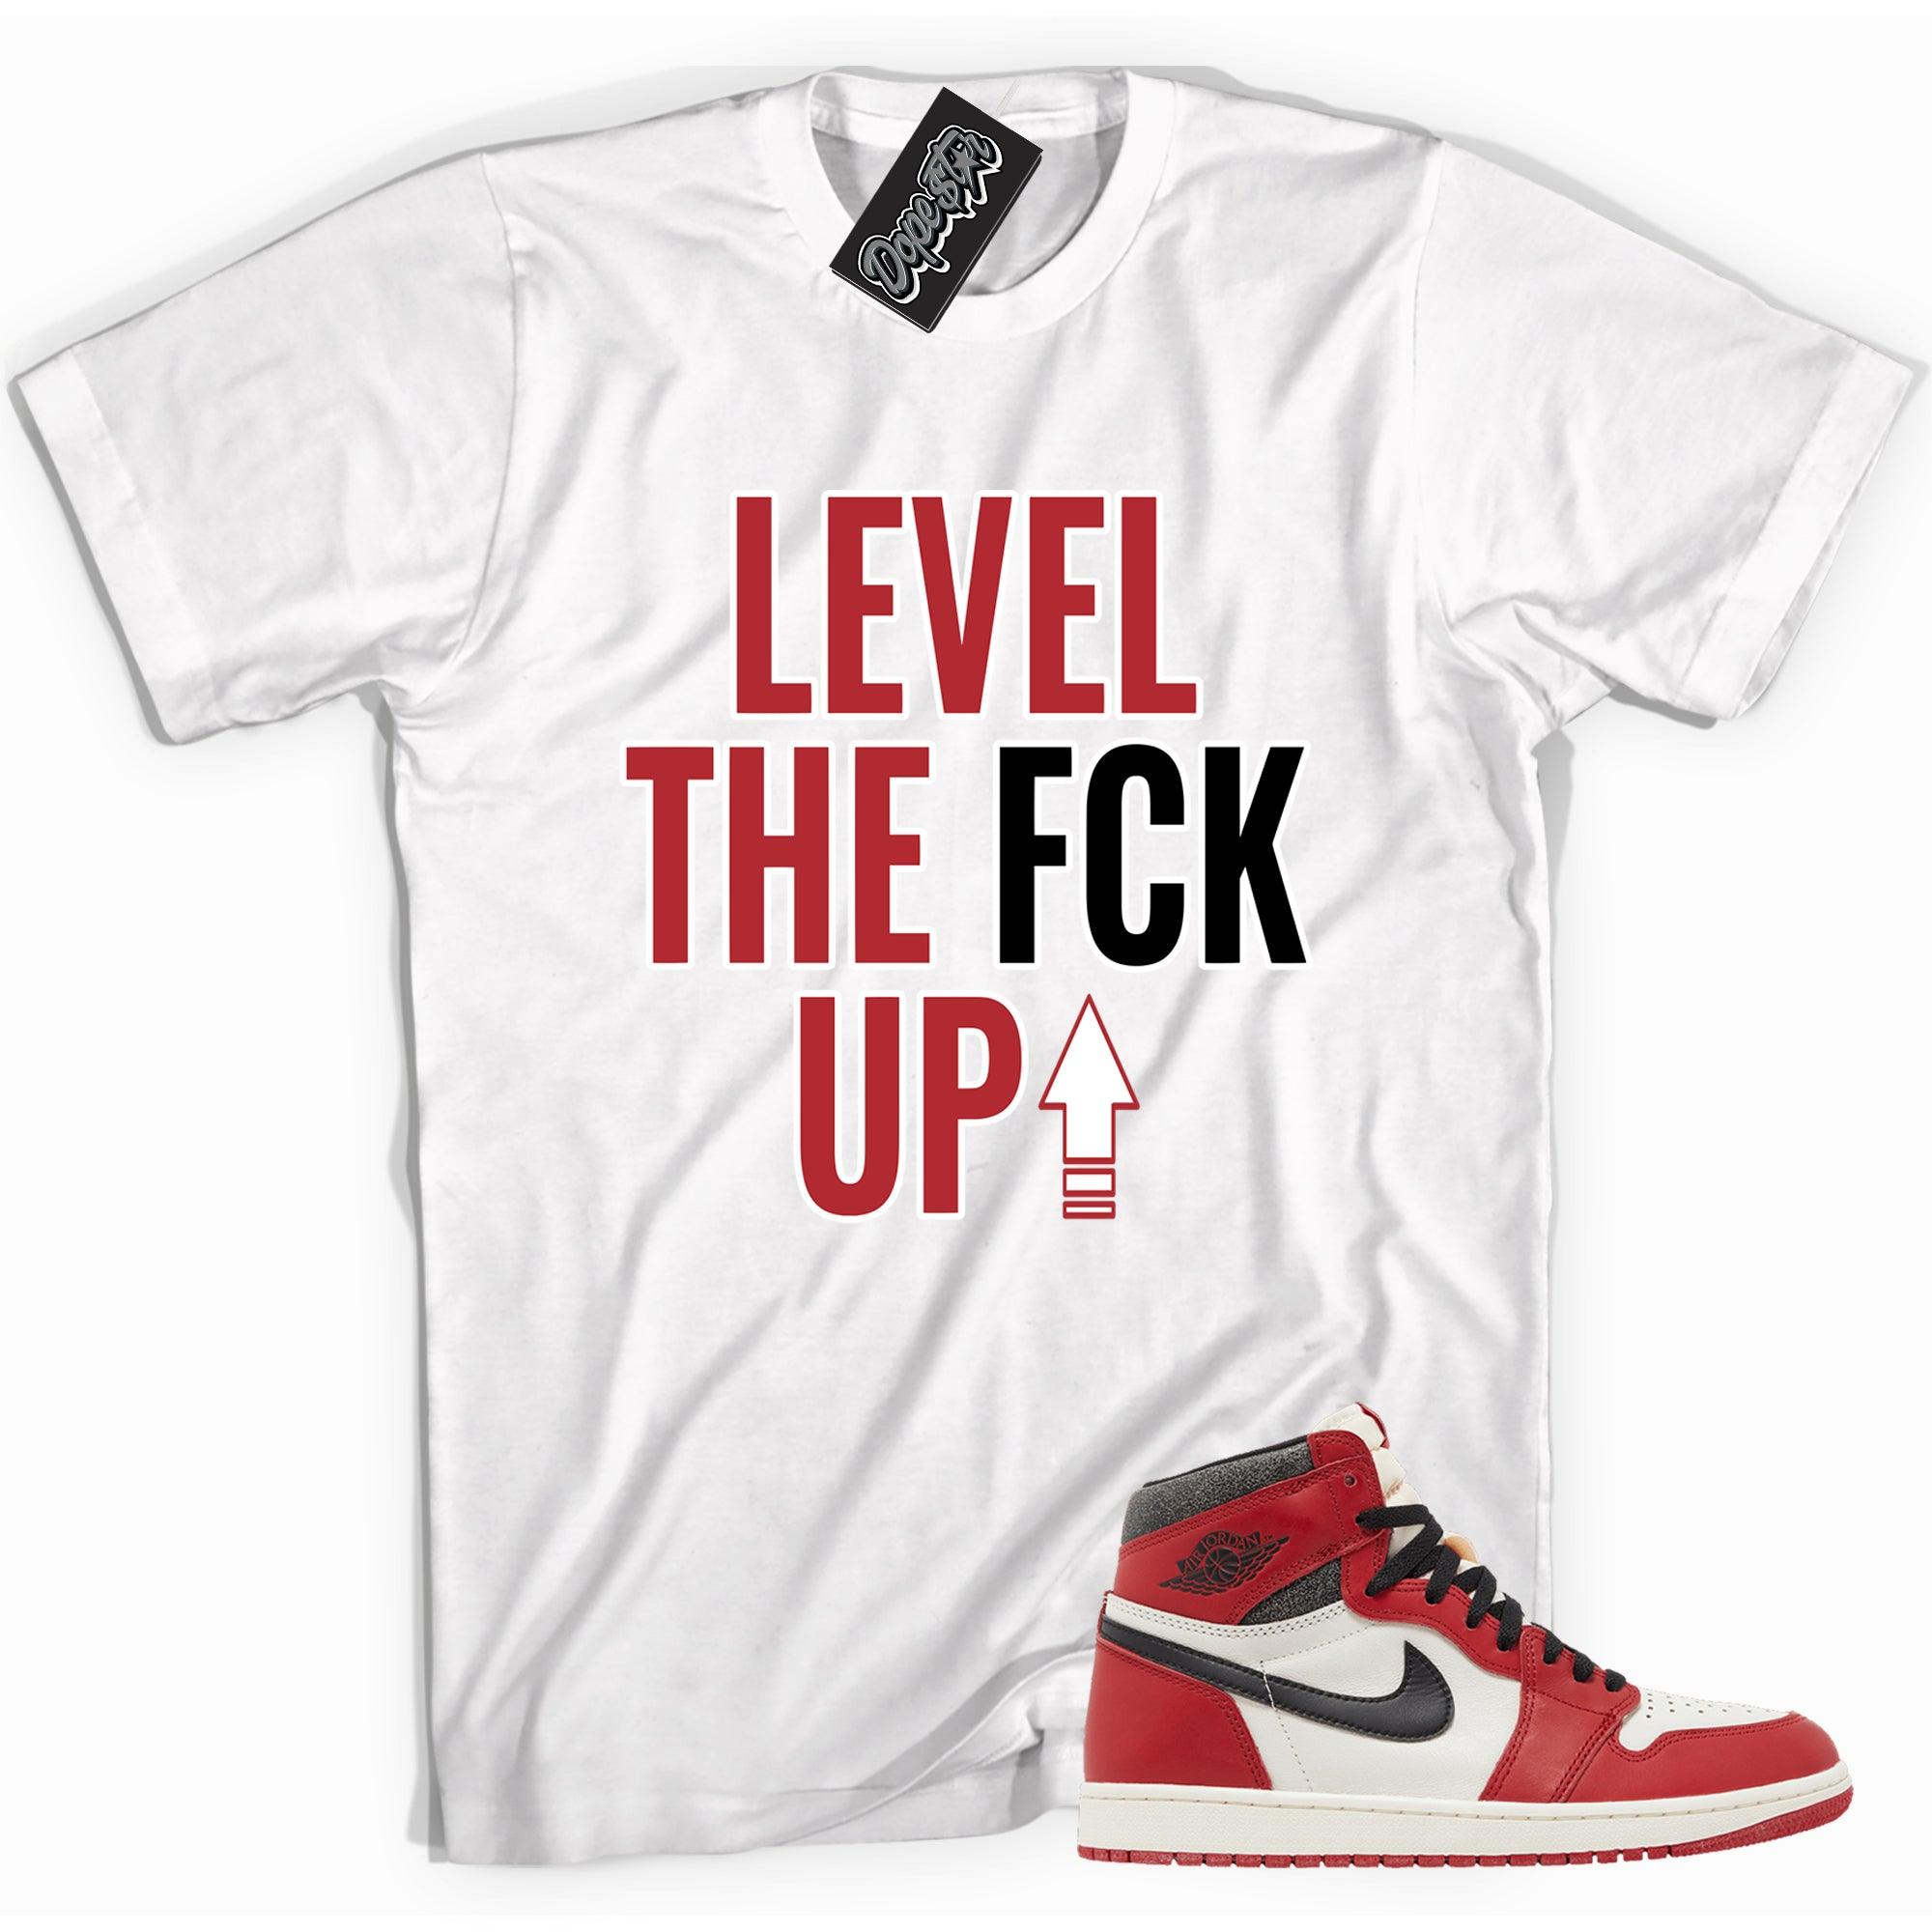 Cool white graphic tee with 'Level Up' print, that perfectly matches Air Jordan 1 Retro High OG Lost and Found sneakers.